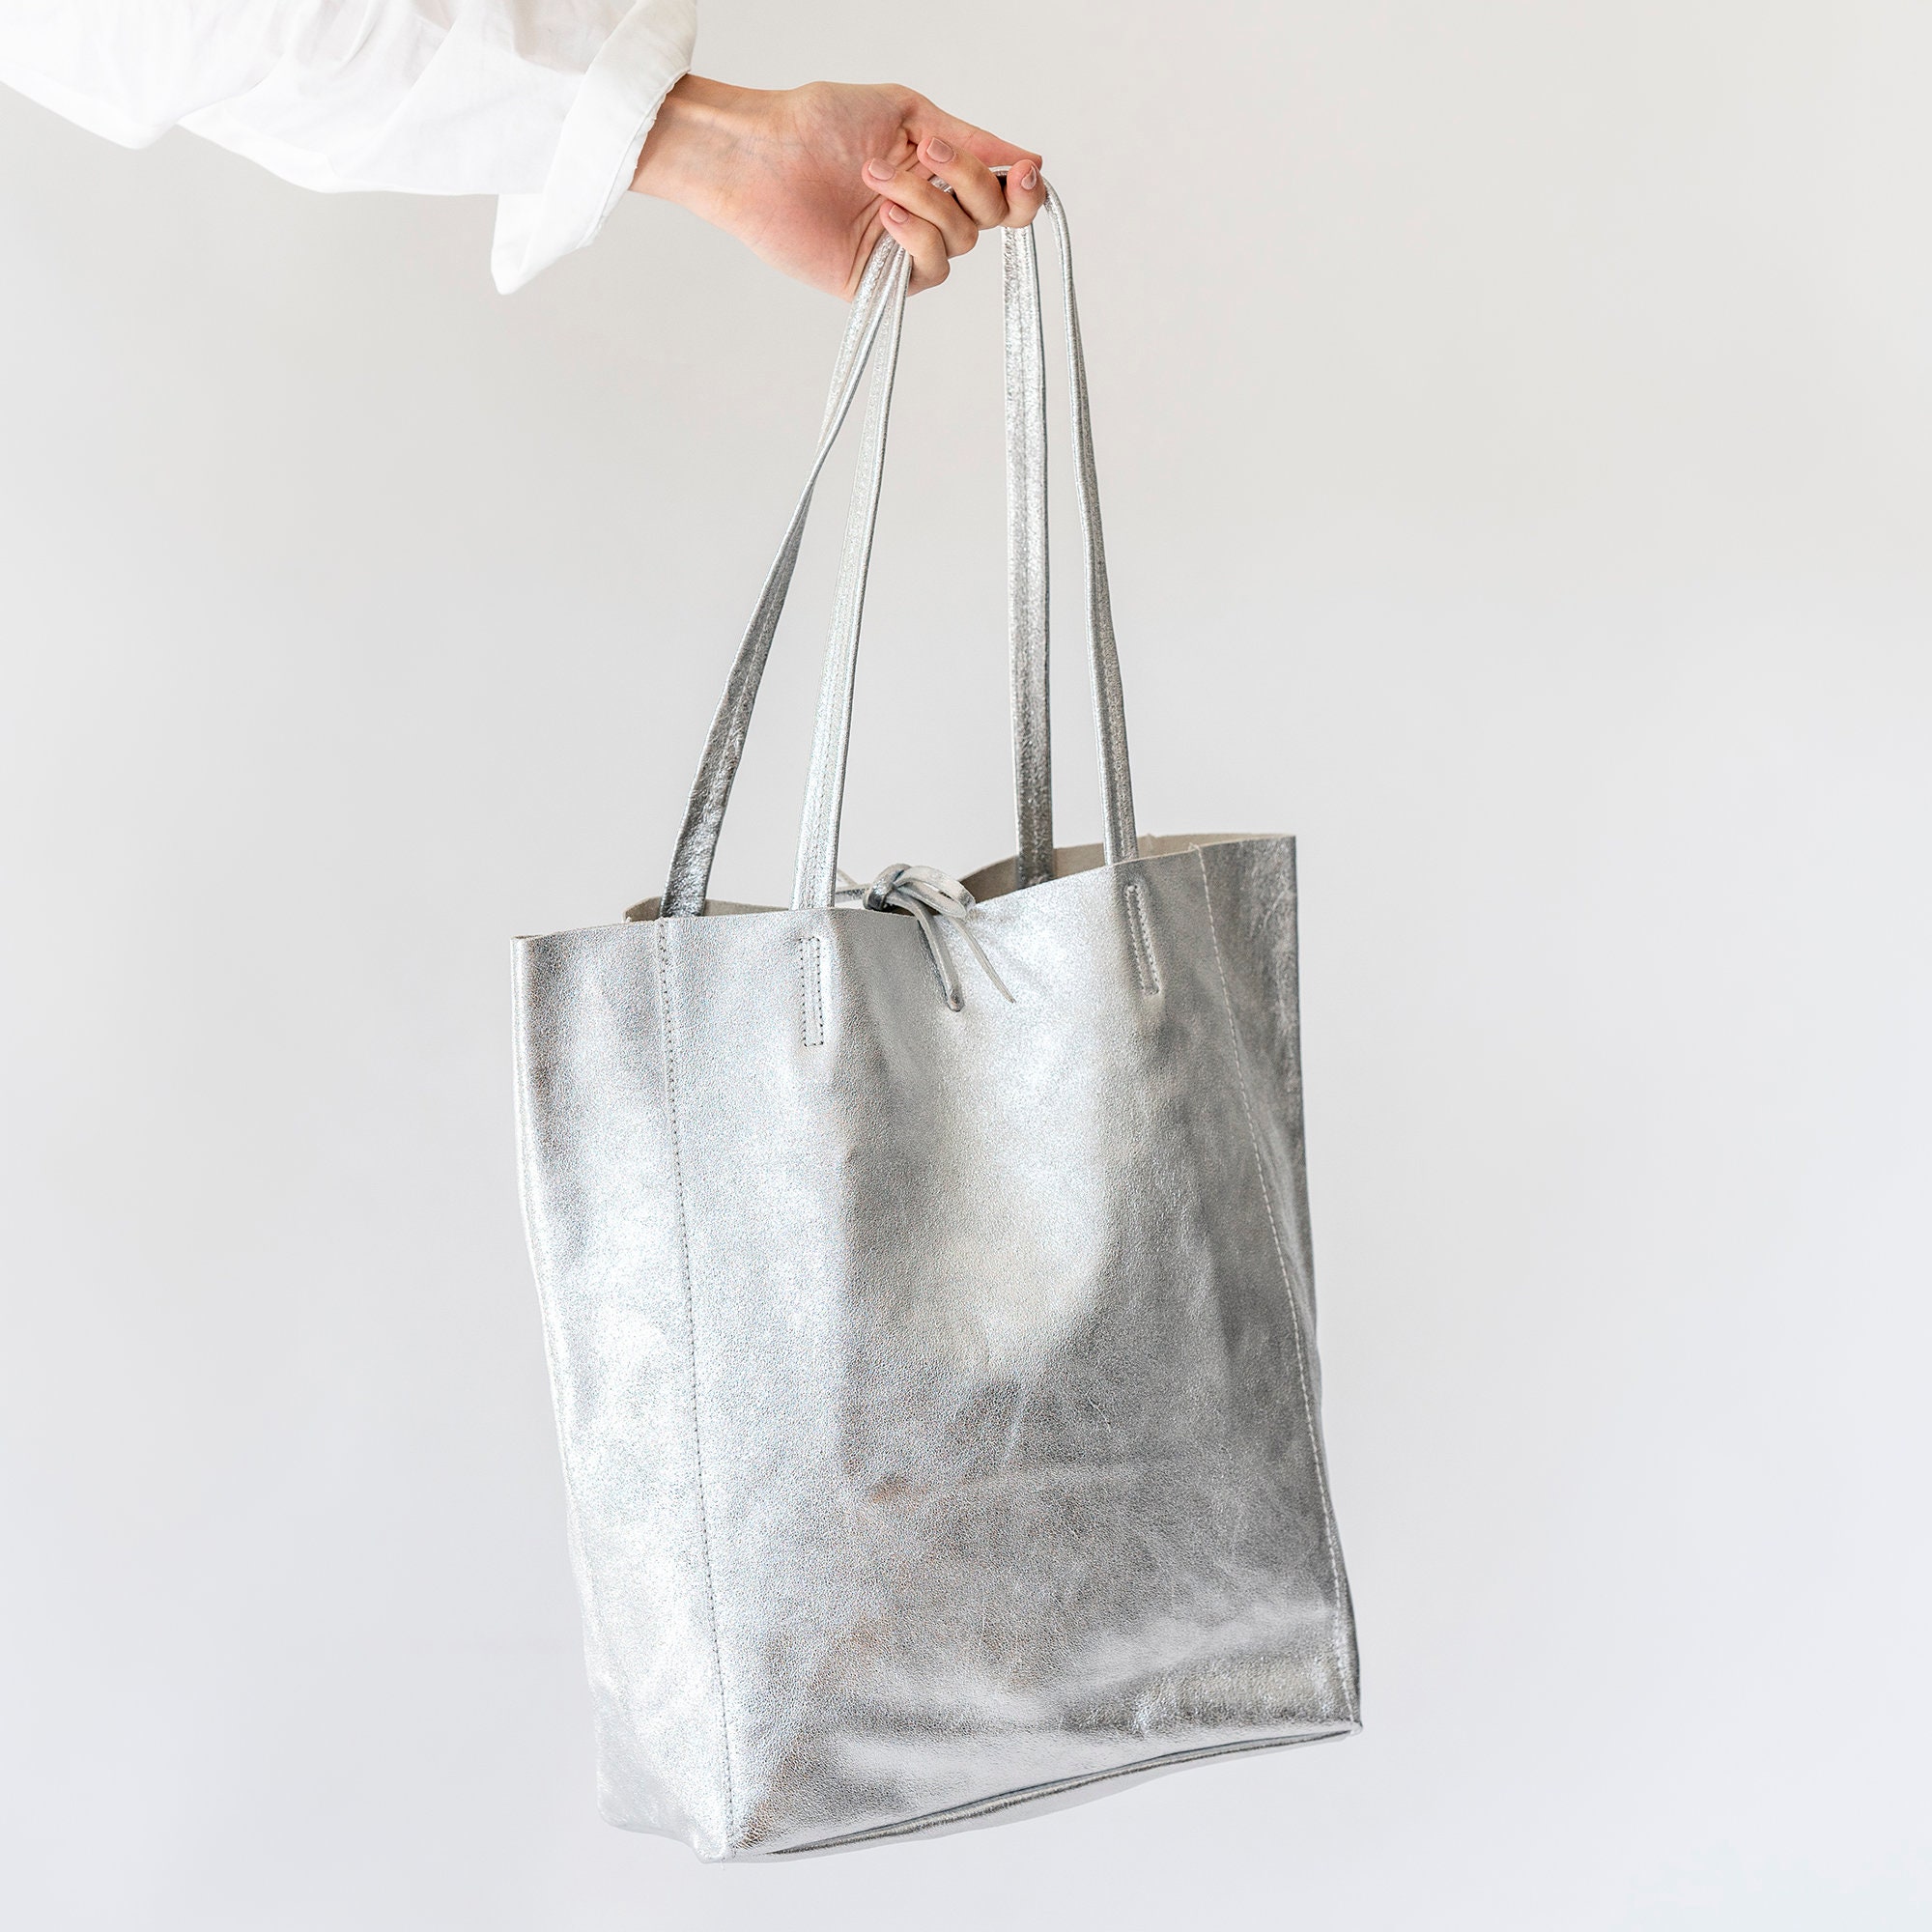 Silver Metallic Leather Tote Soft Leather Tote Shopper - Etsy UK